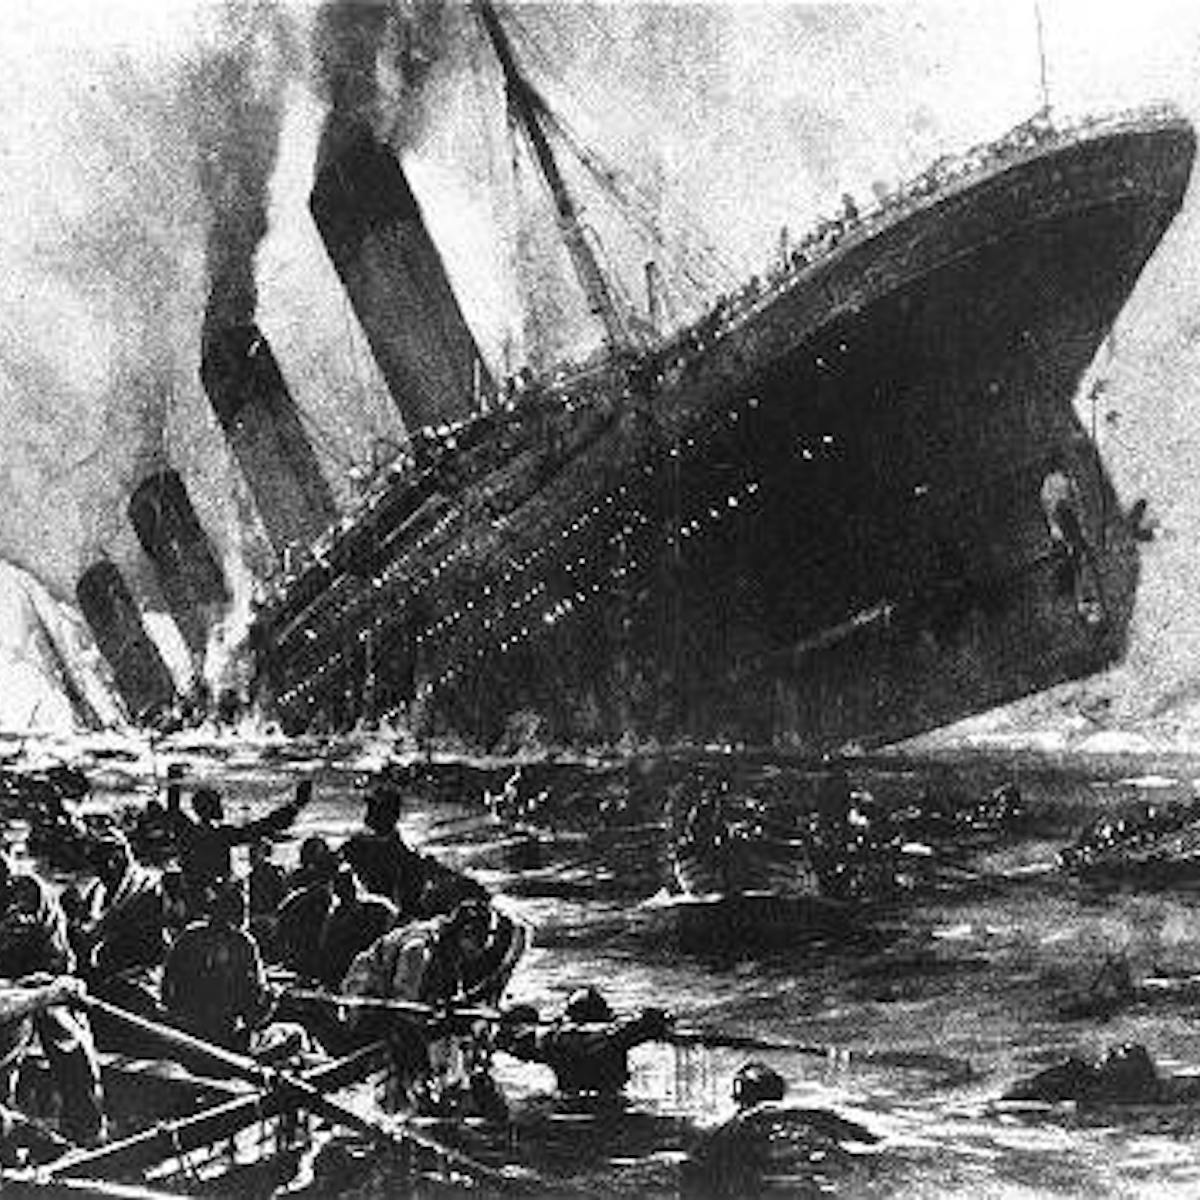 Titanic twist: 1912 wasn't a bad year for icebergs after all